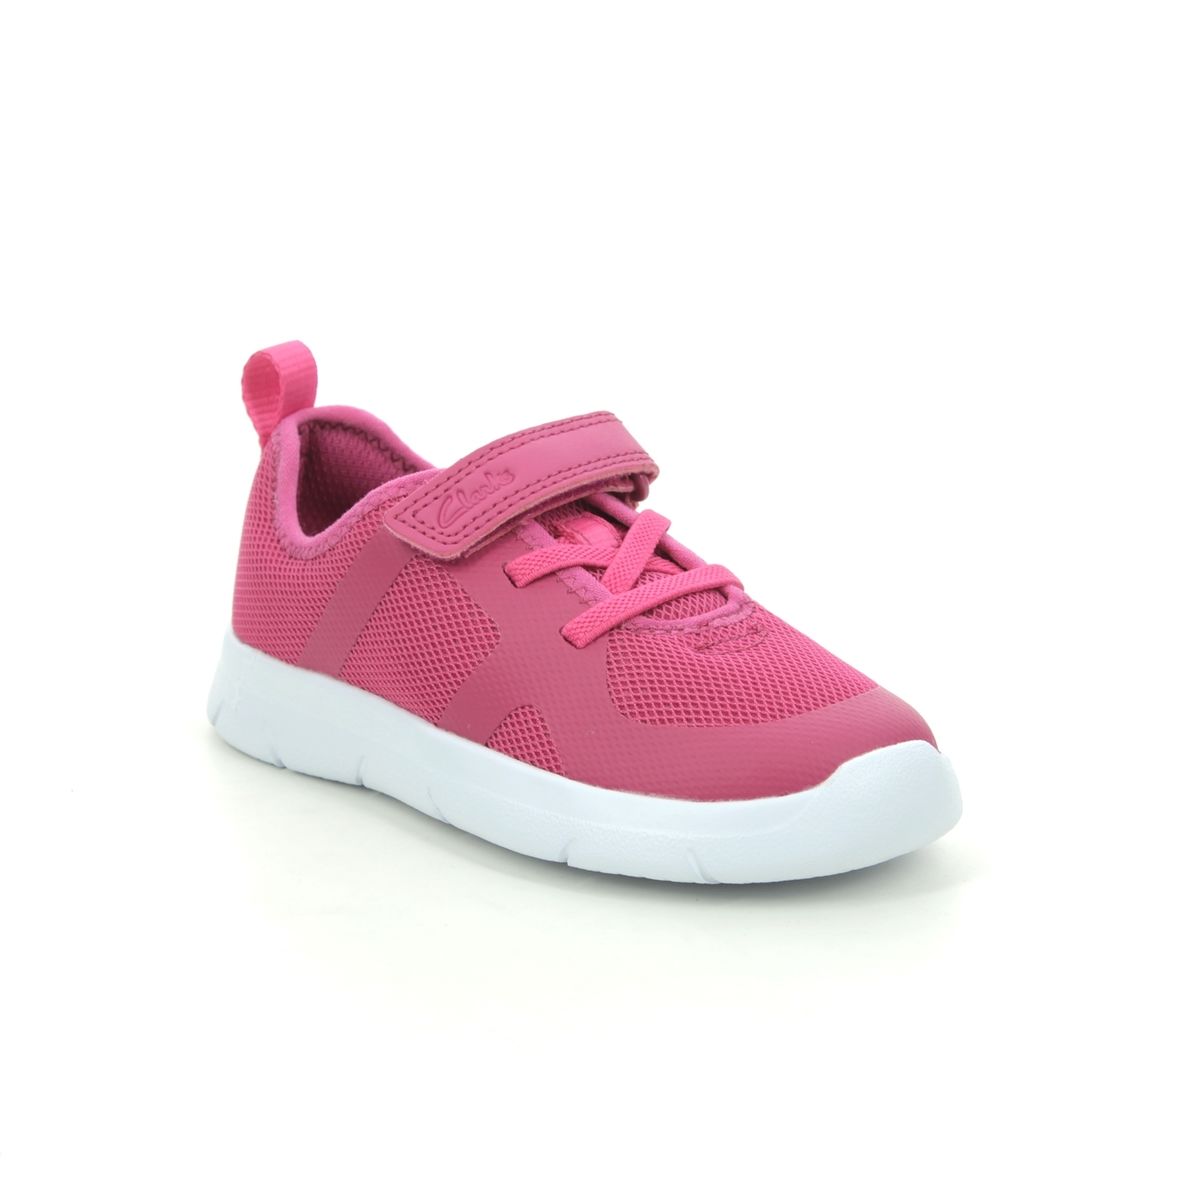 Clarks Ath Flux T Raspberry pink Kids toddler girls trainers 5155-87G